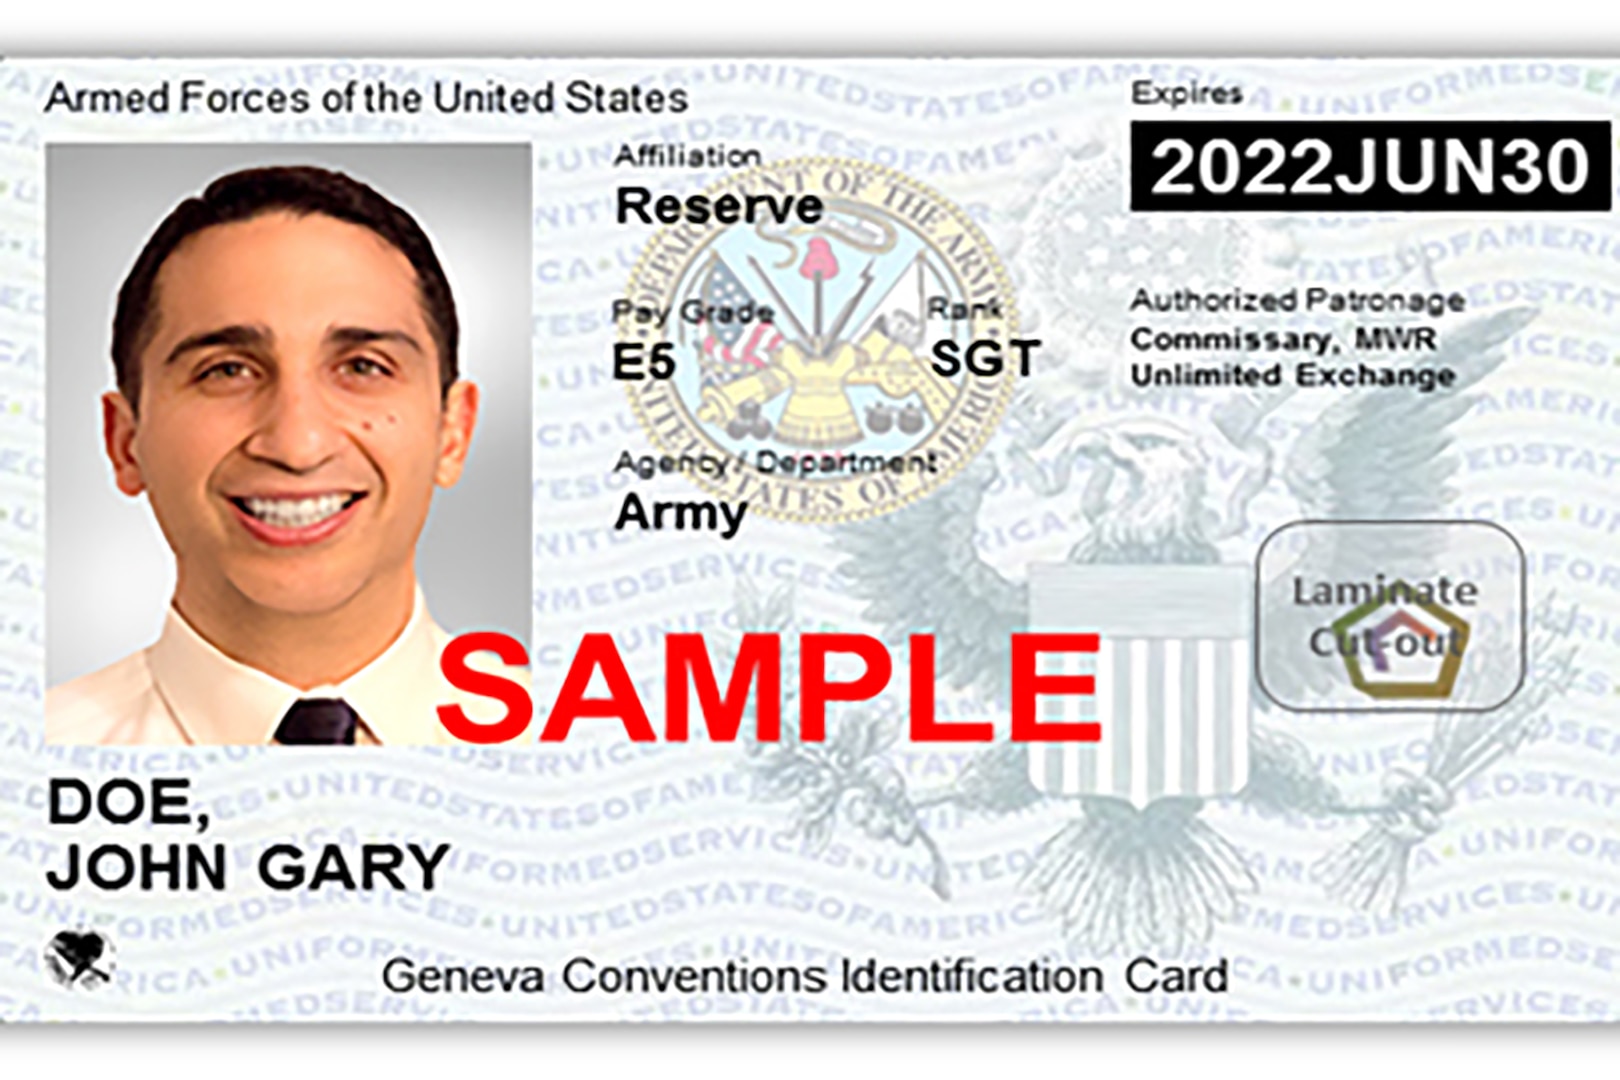 new-id-cards-being-issued-for-military-family-members-retirees-joint-base-san-antonio-news